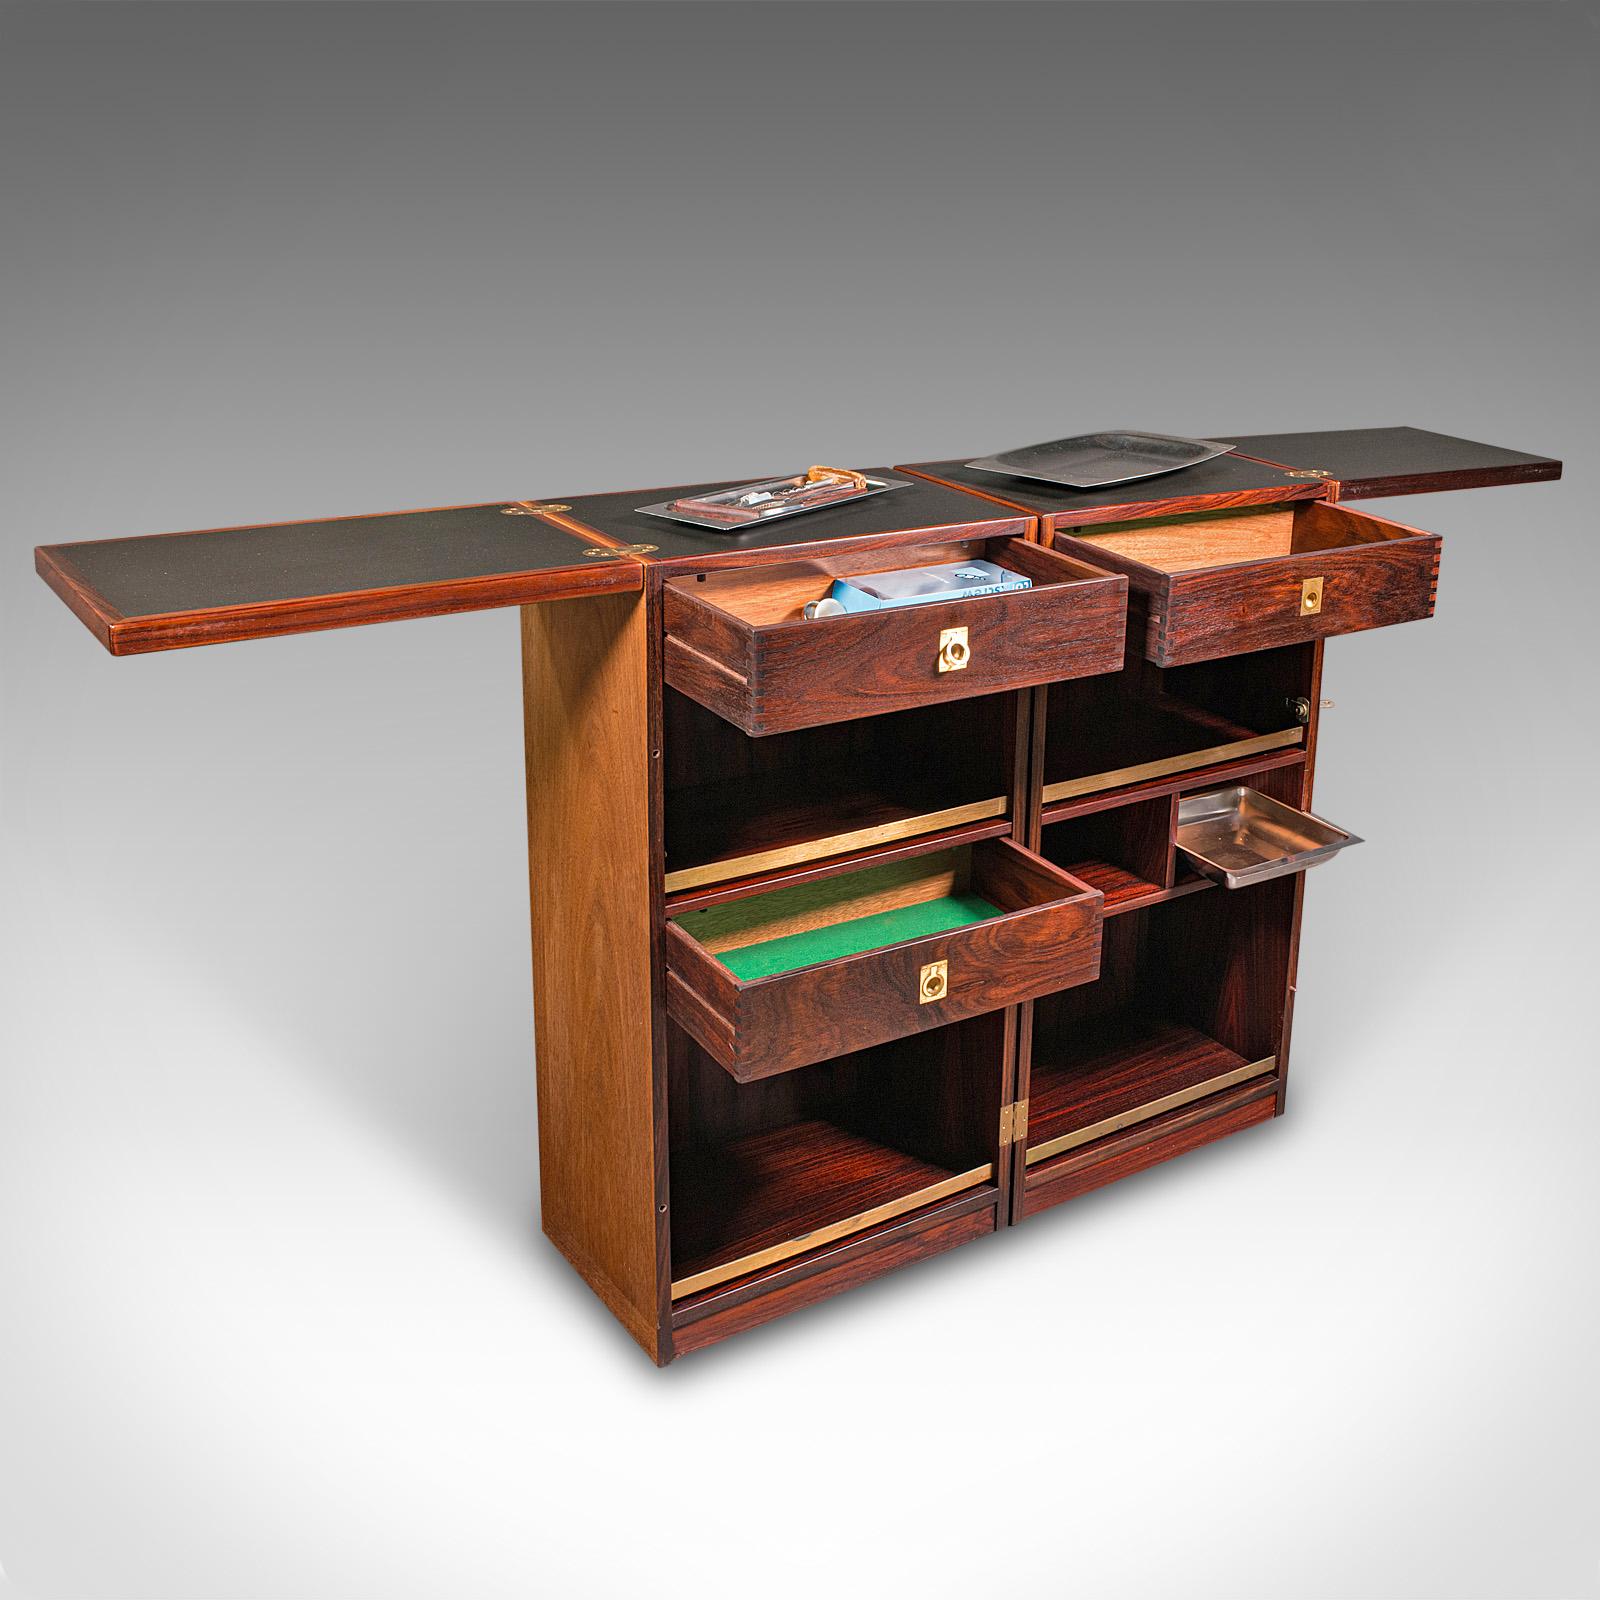 This is a vintage metamorphic cocktail cabinet. A Danish, rosewood and brass mid-century drinks bar by Reno Wahl Iversen for Dyrlund, circa 1960.

Superb mid-century modern living, with this high quality fold-out cocktail bar
Displays a desirable